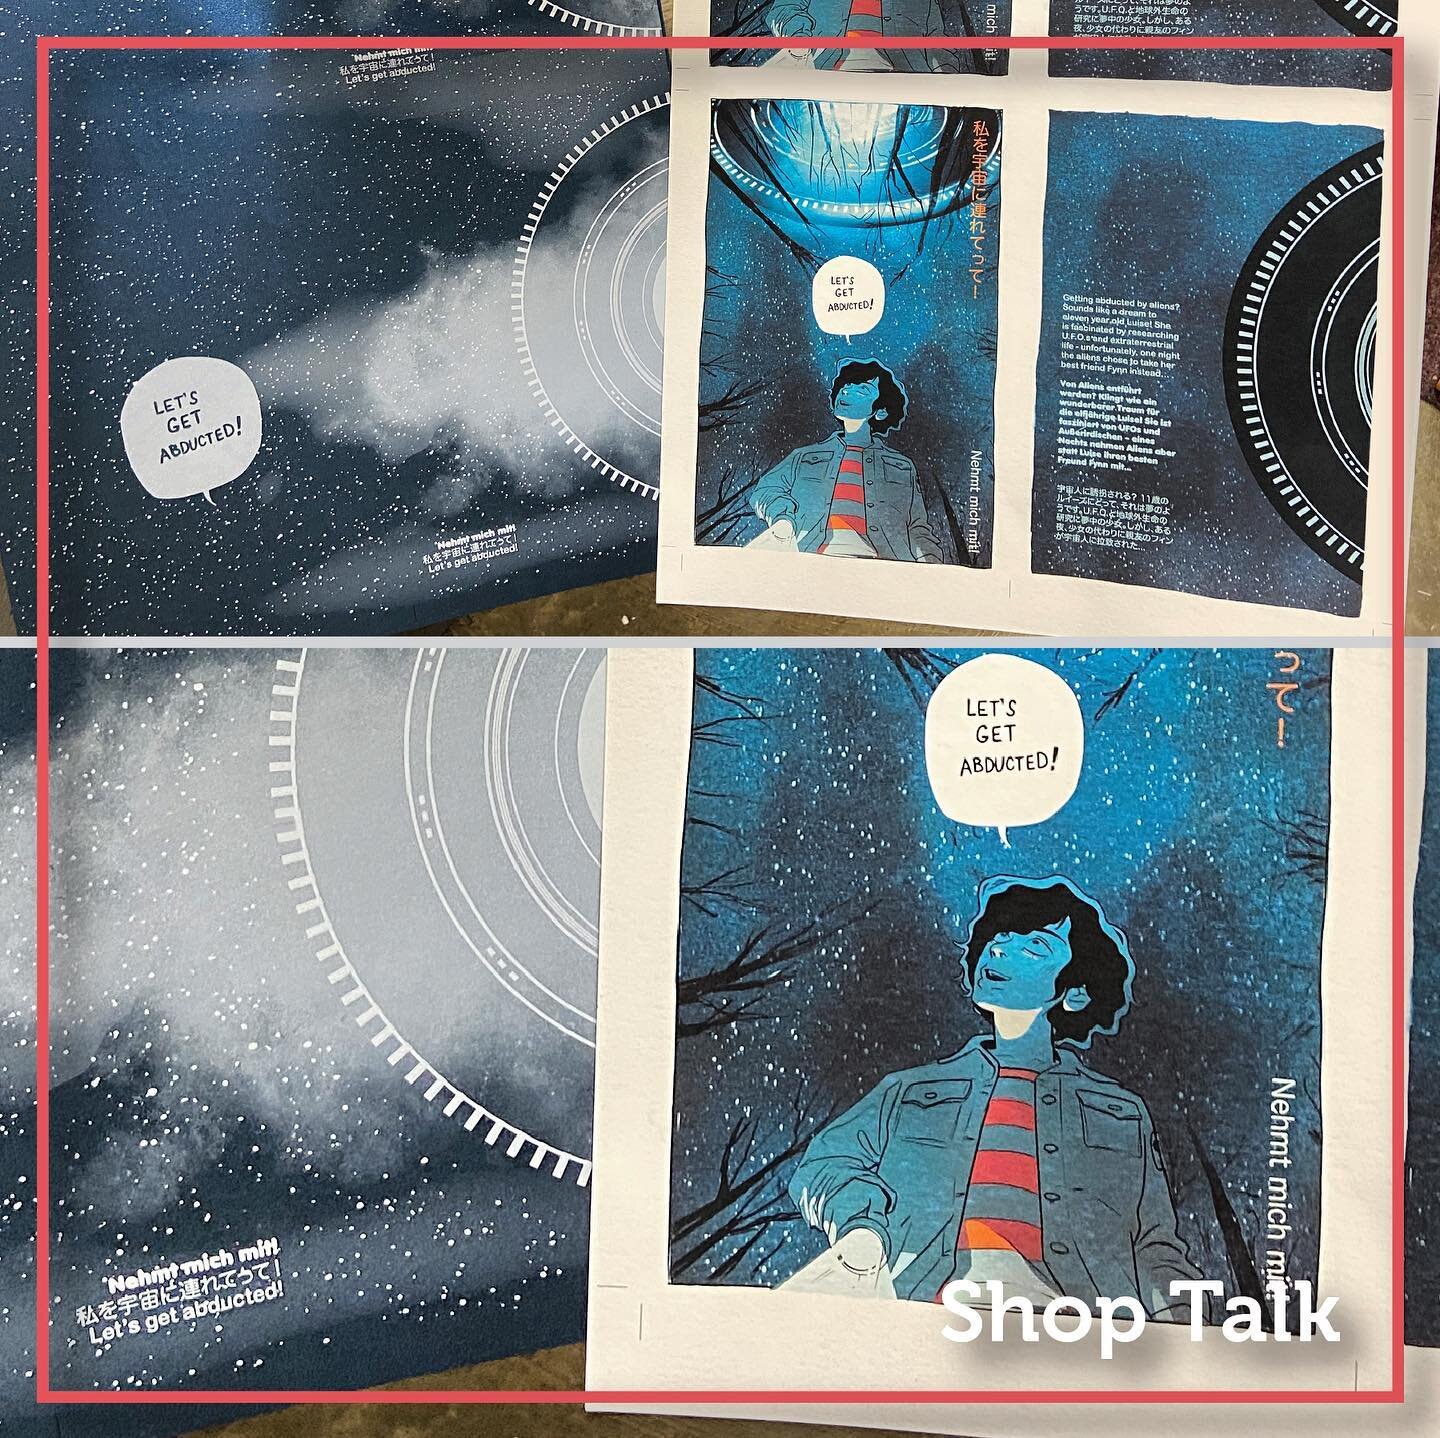 Today&rsquo;s #wpshoptalk is a cover for @fend13th&rsquo;s (me!) new book &lsquo;Let&rsquo;s Get Abducted&rsquo; inside cover is white toner on #Neenah #Stardream Lapis Lazuli, the #dustjacket is Neenah #Suedetex. The insides will be a comic printed 